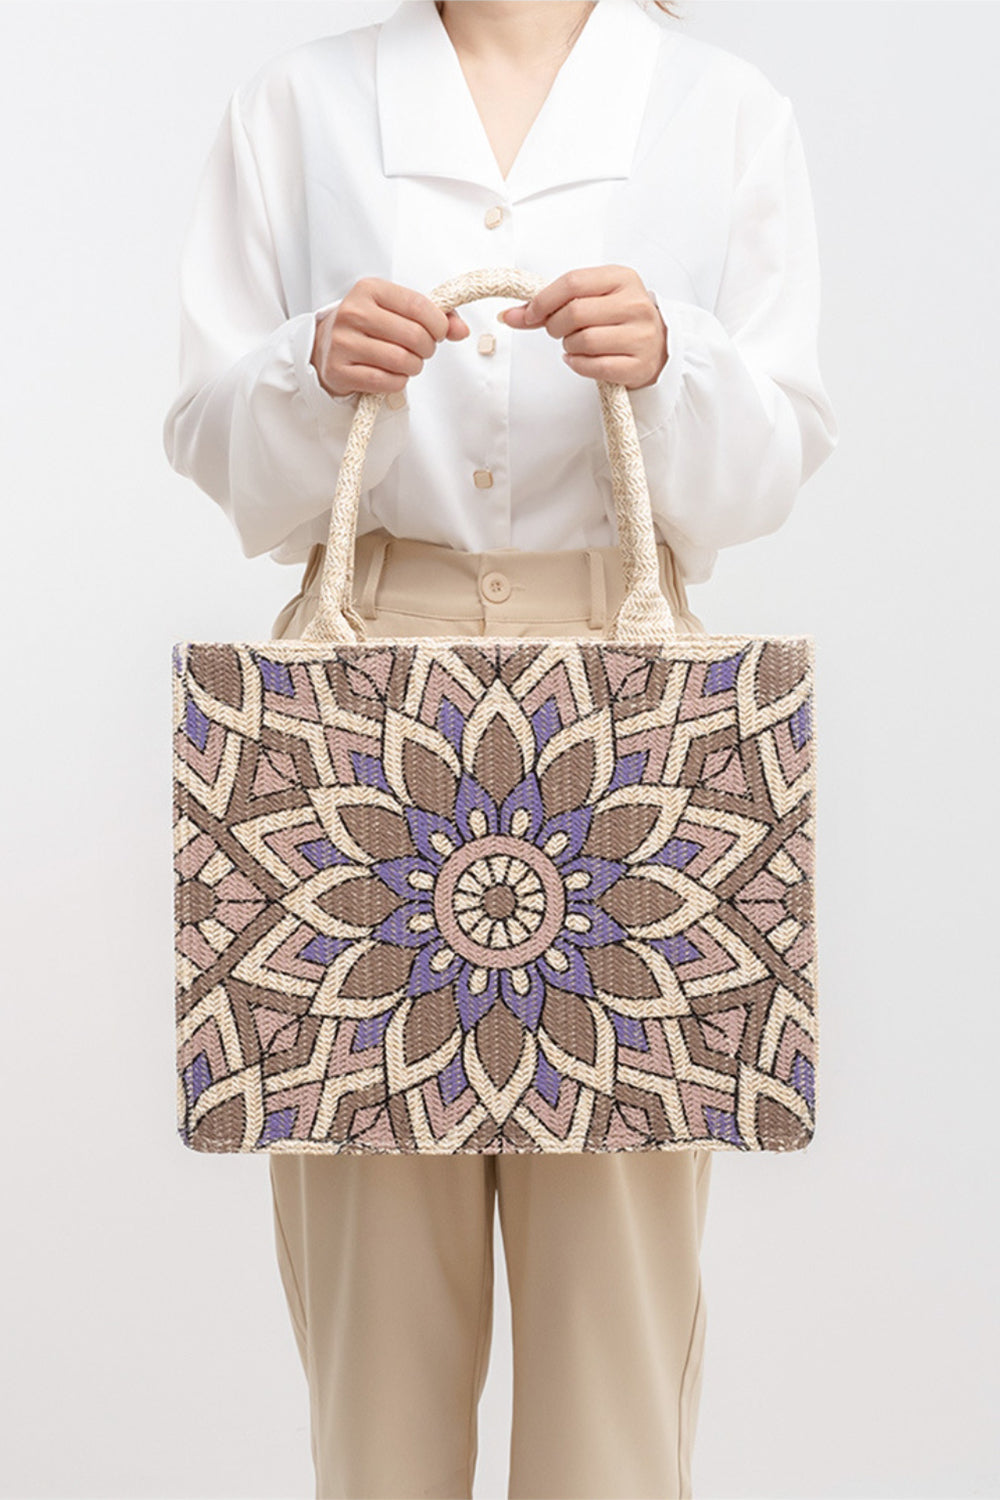 Flower Straw Weave Tote Bag - House of Binx 